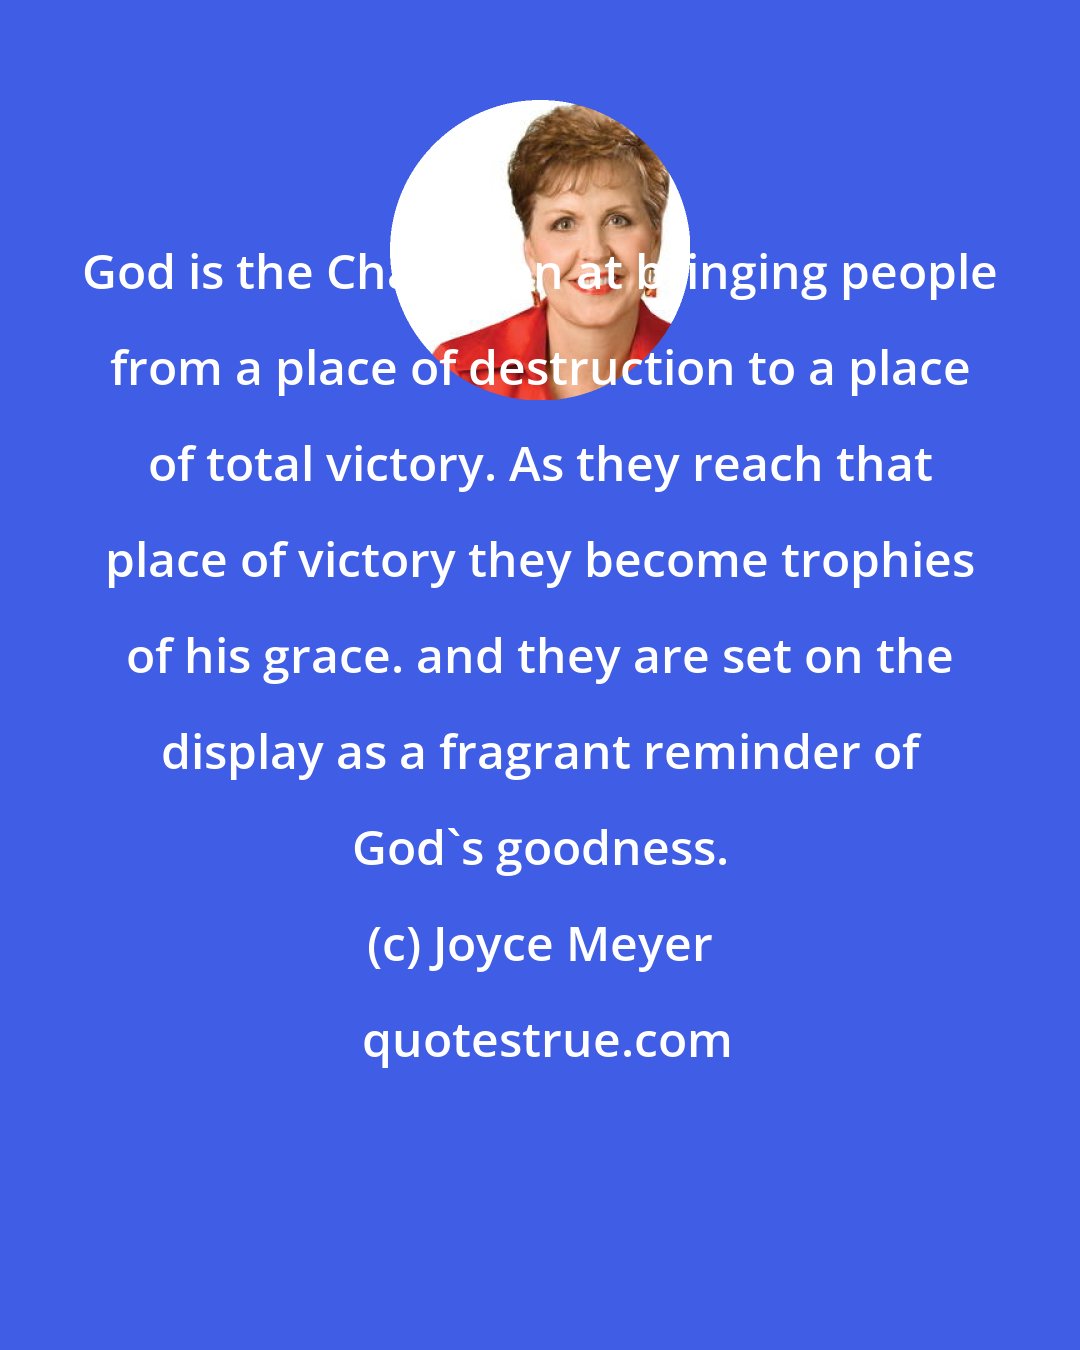 Joyce Meyer: God is the Champion at bringing people from a place of destruction to a place of total victory. As they reach that place of victory they become trophies of his grace. and they are set on the display as a fragrant reminder of God's goodness.